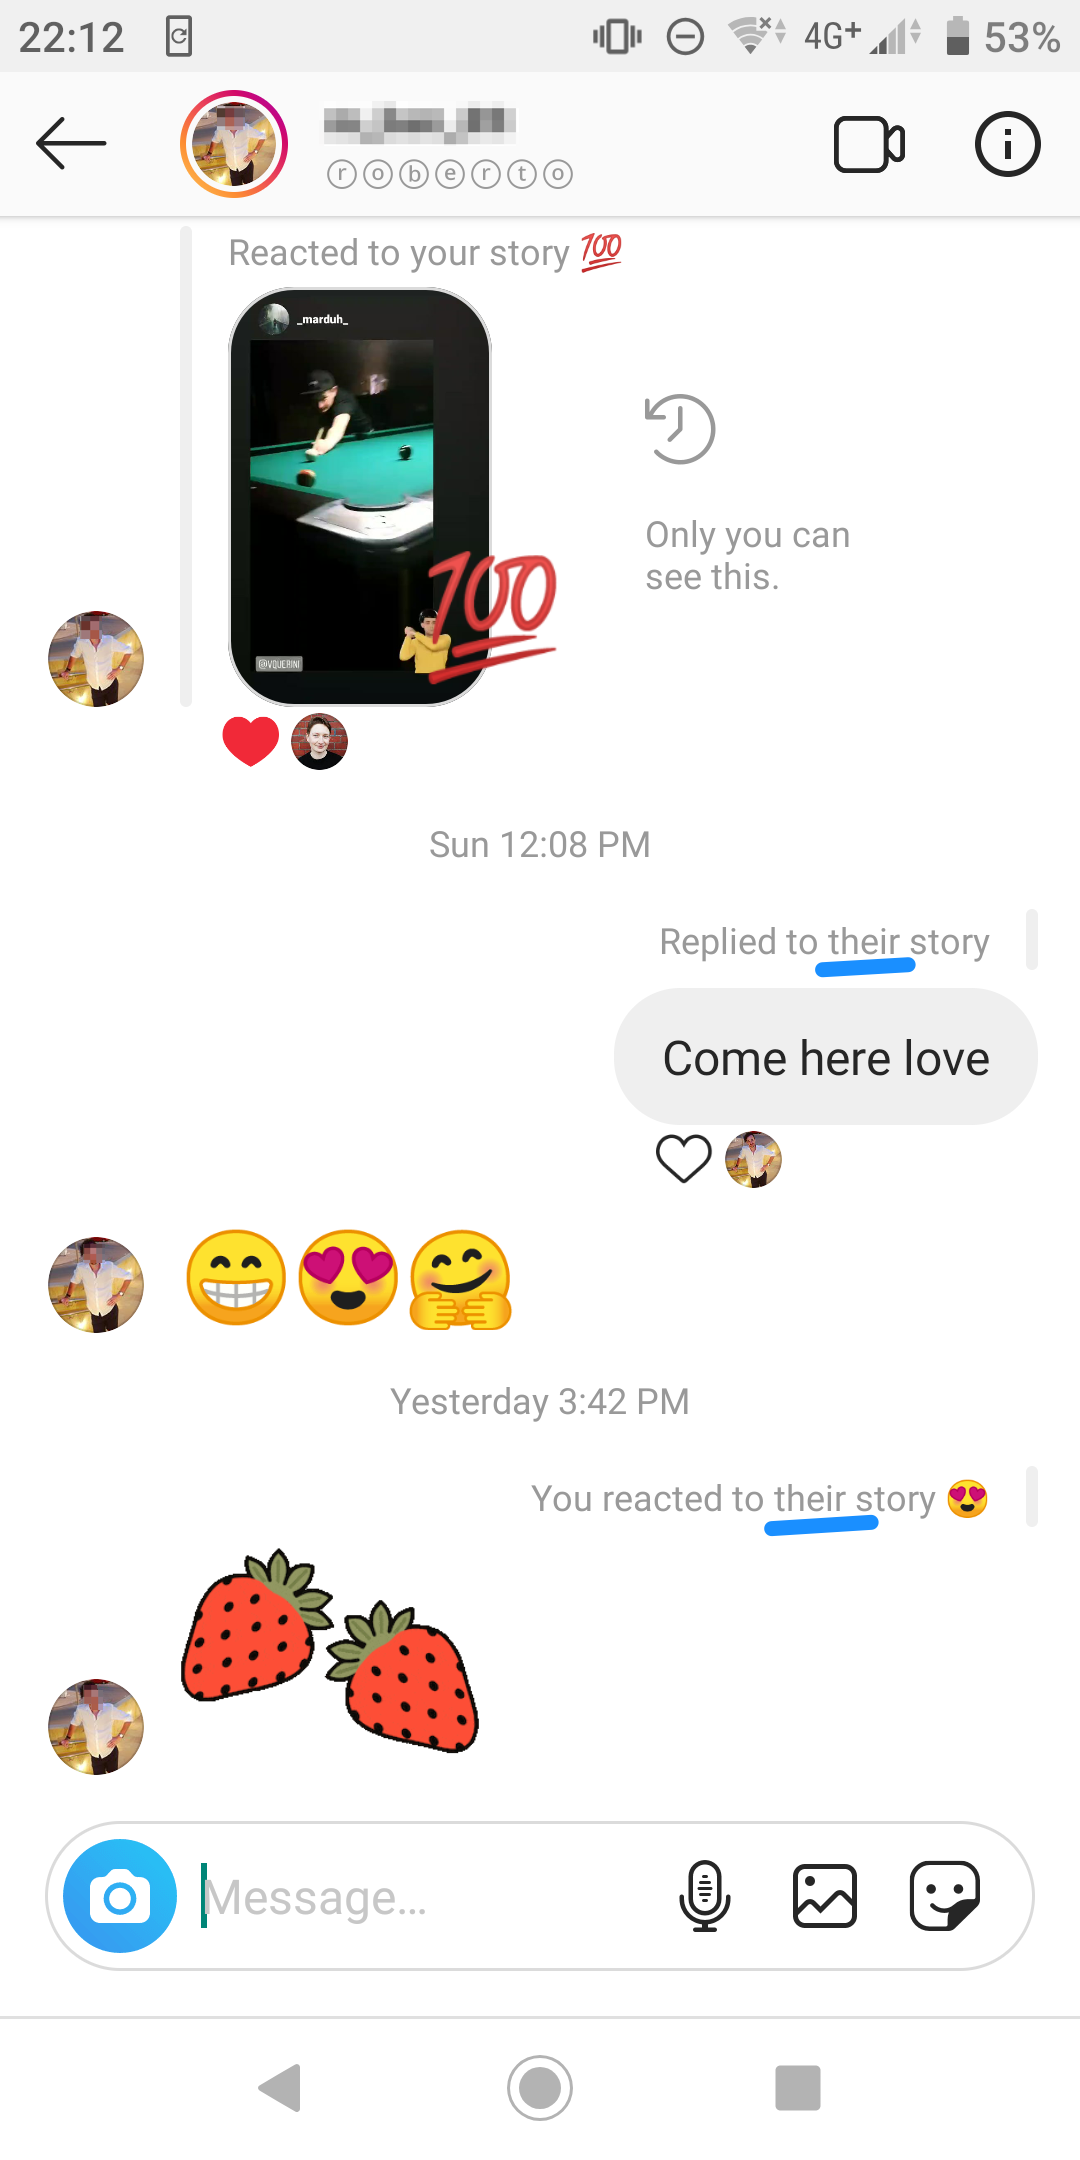 Screenshot of a private chat in Instagram between two users; gender-neutral pronouns used for both people